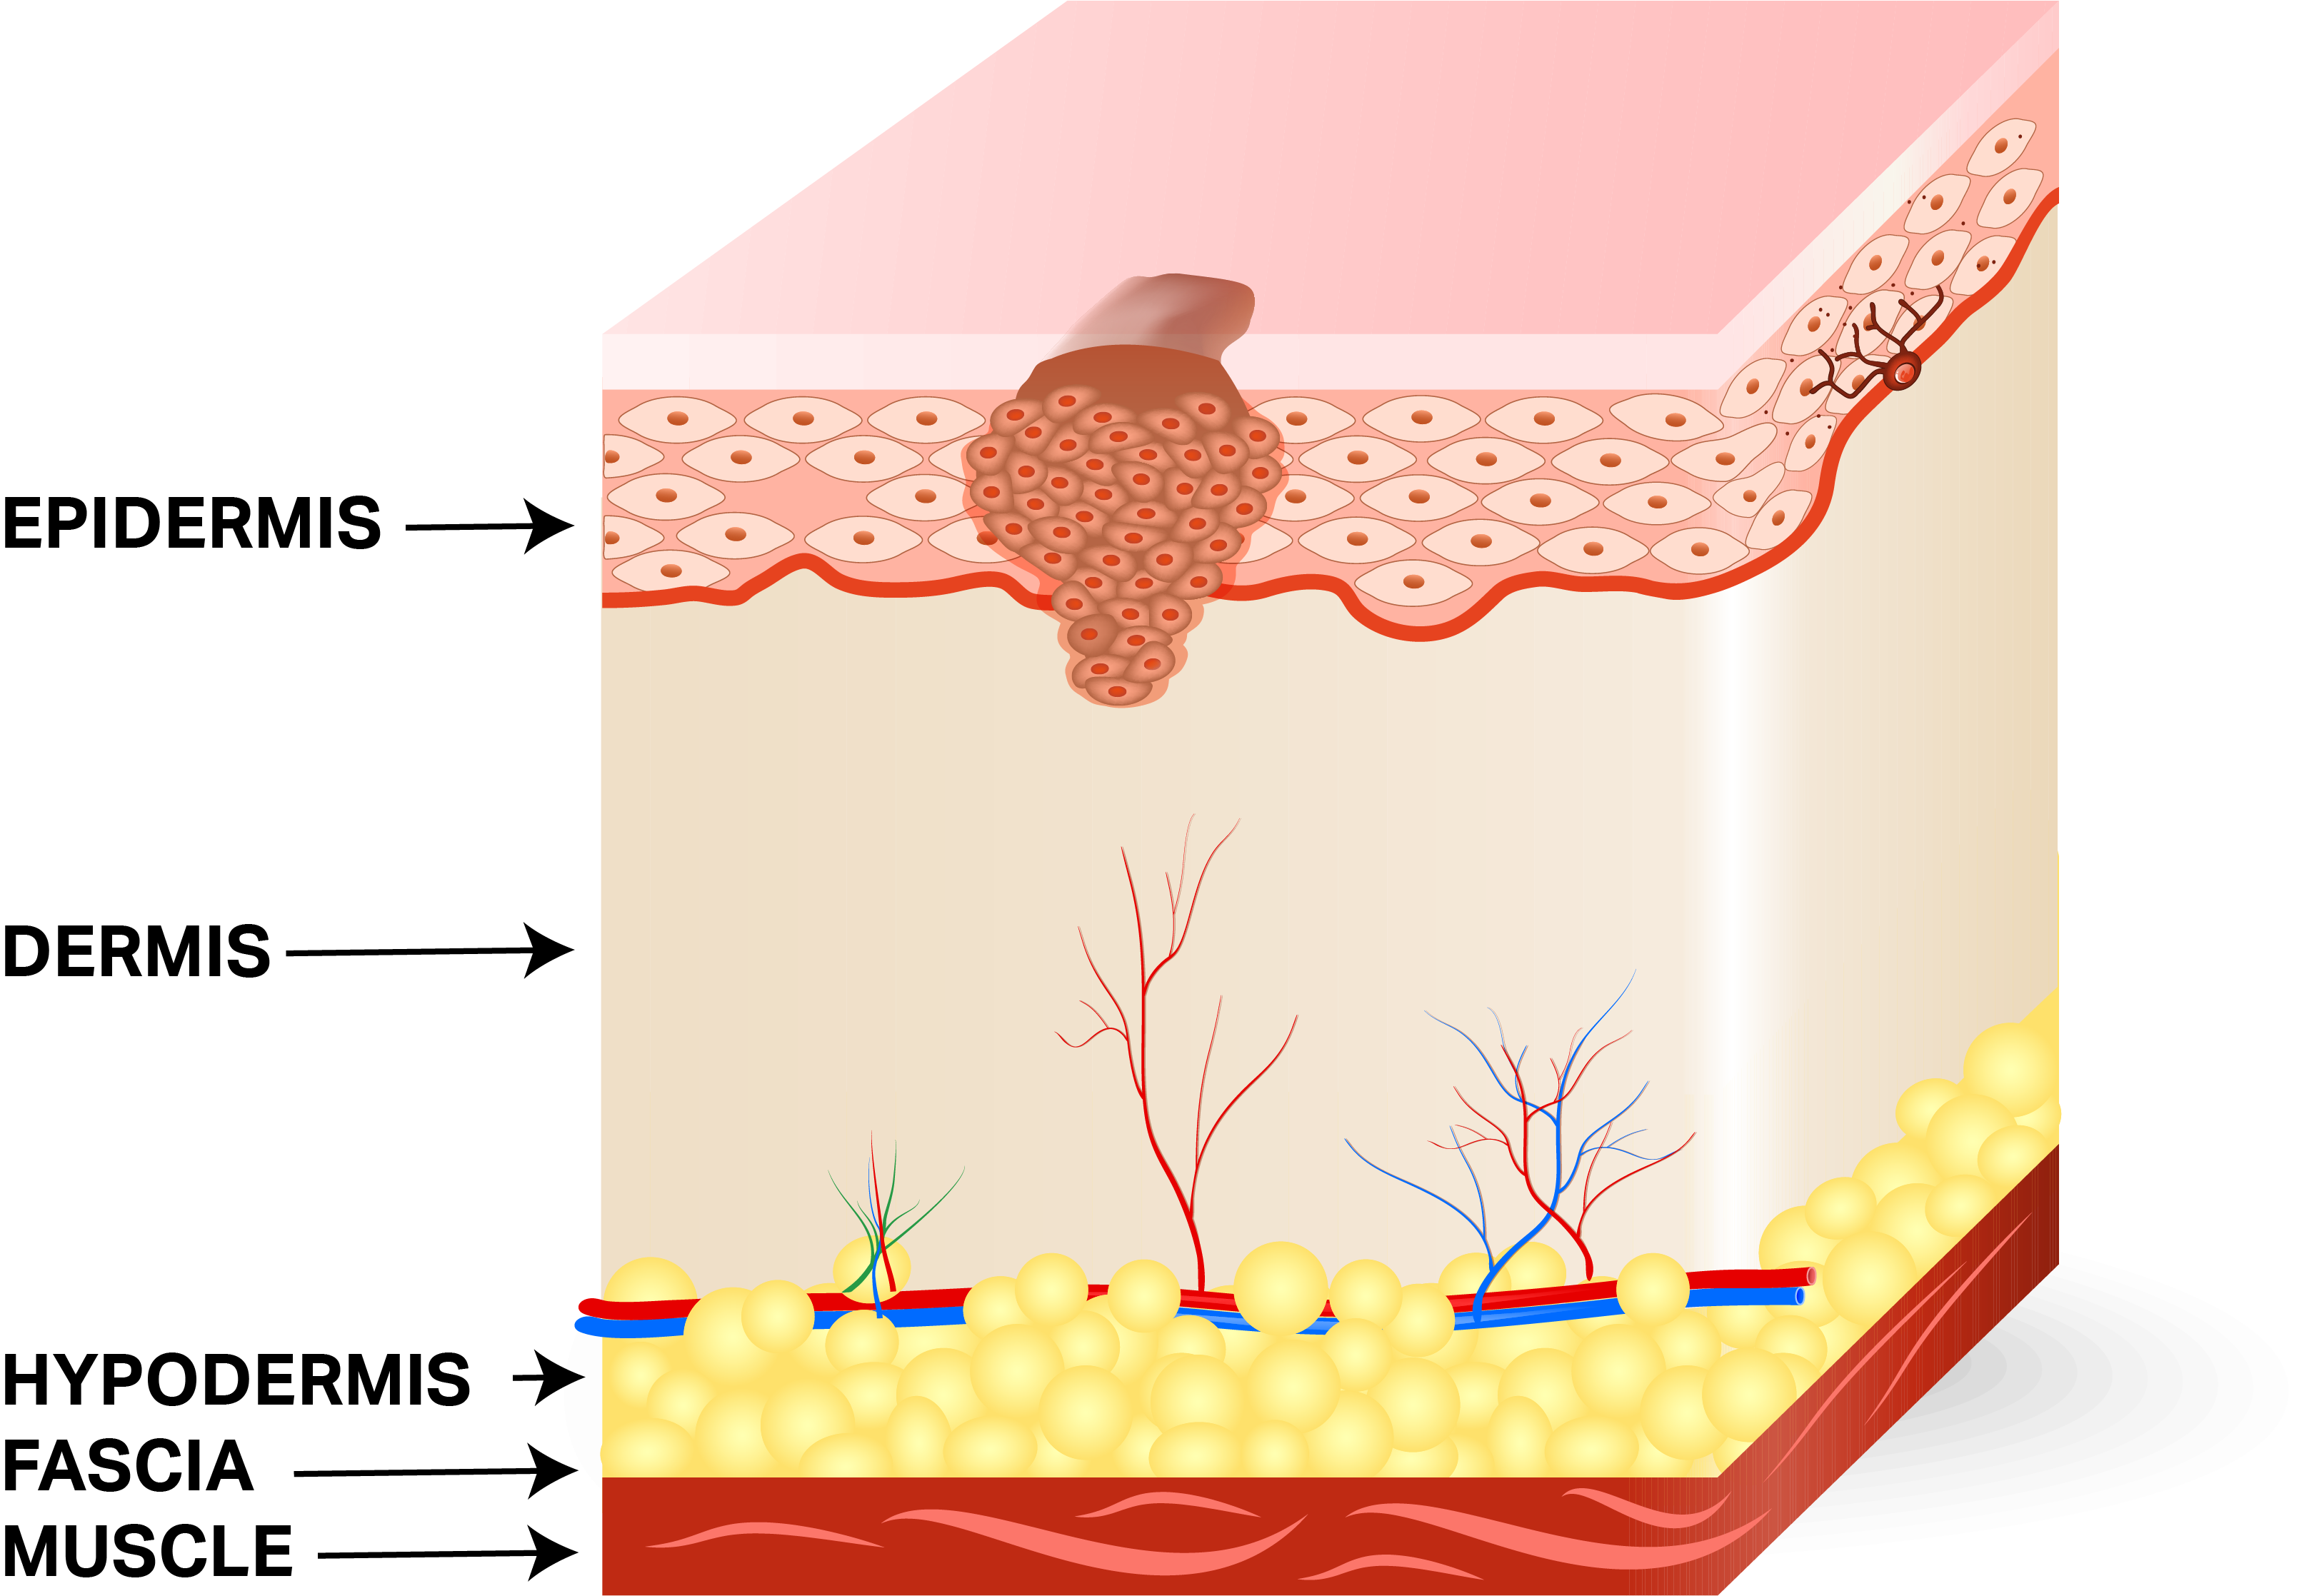 Staging Squamous Cell Skin Cancer: A Practical Description ...